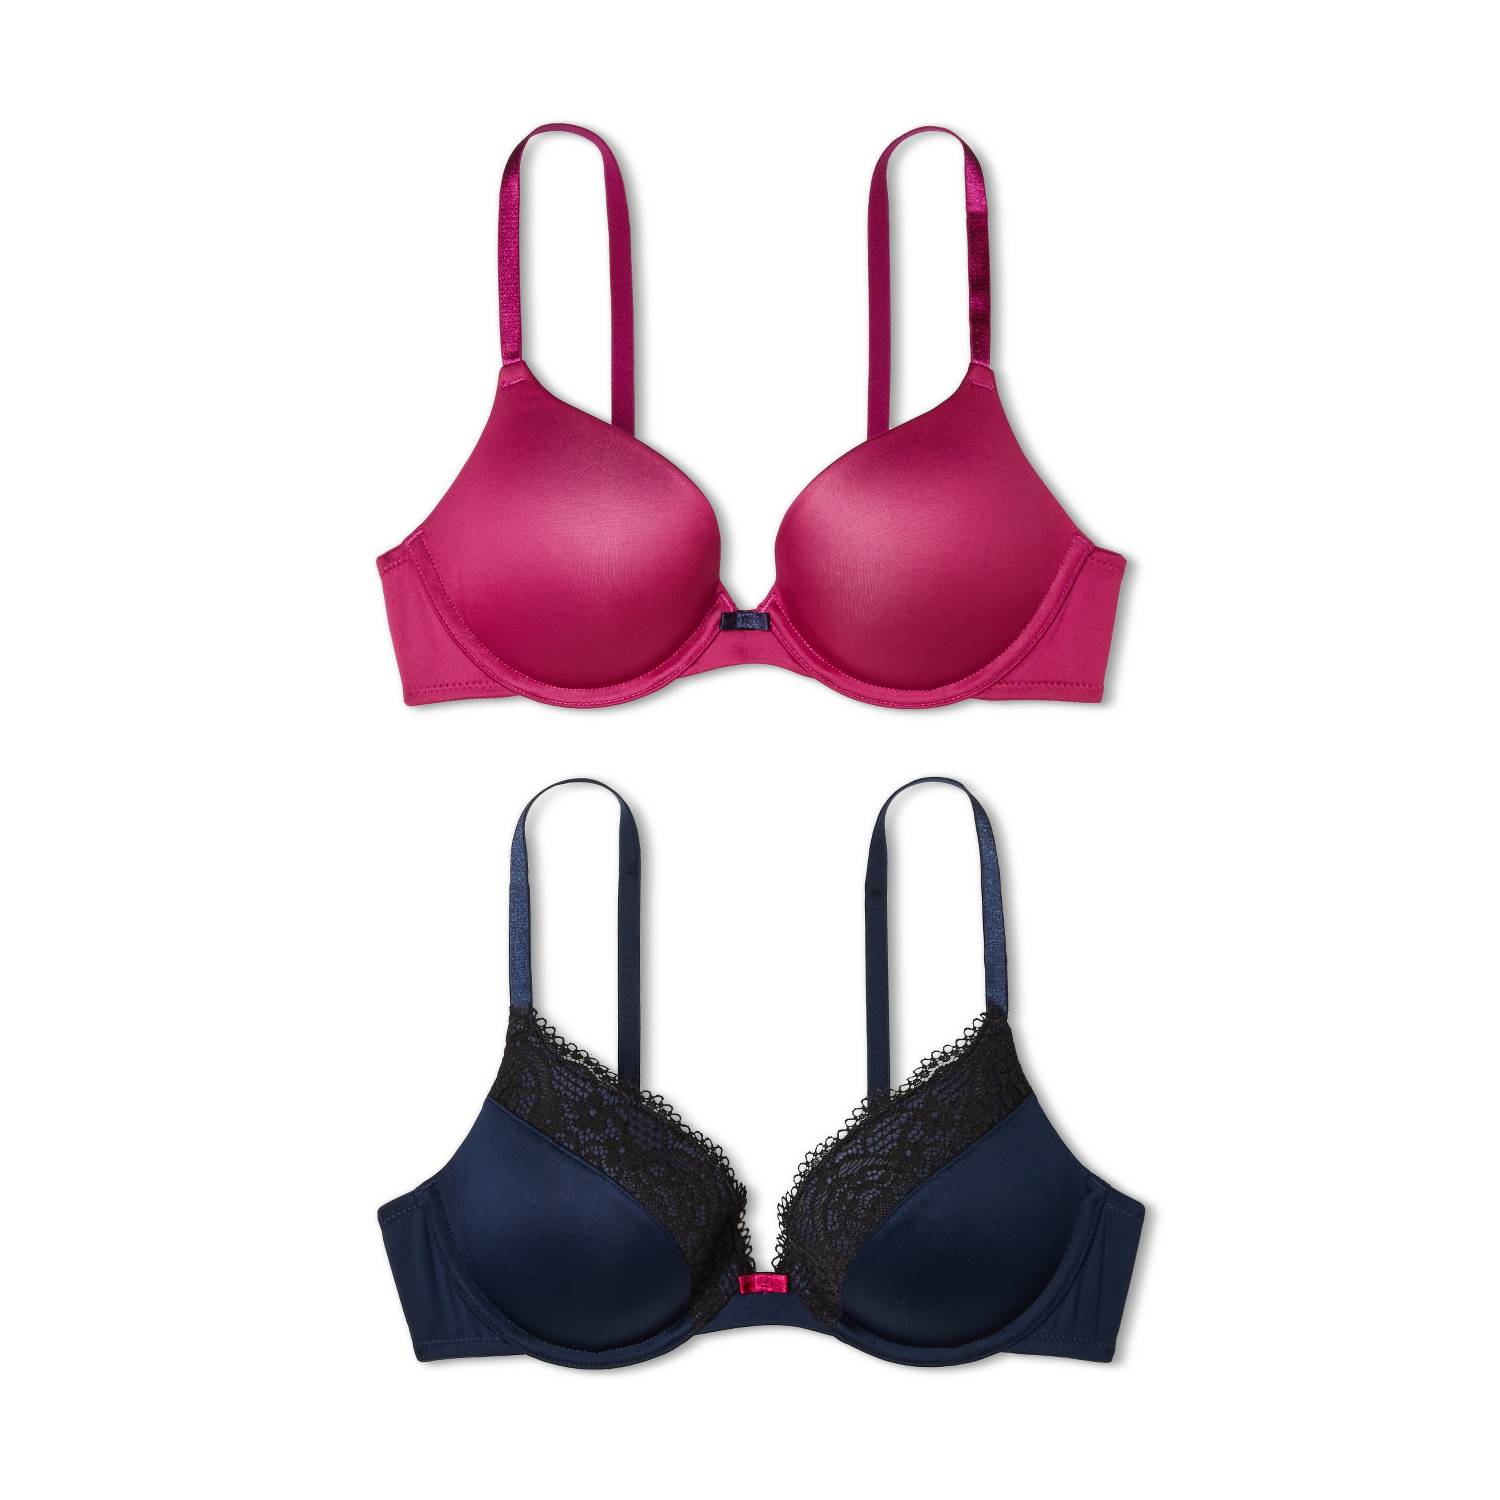 Maidenform Self Expressions 2-Pack Push-up Bras Only $10.00! (Reg $19.99)